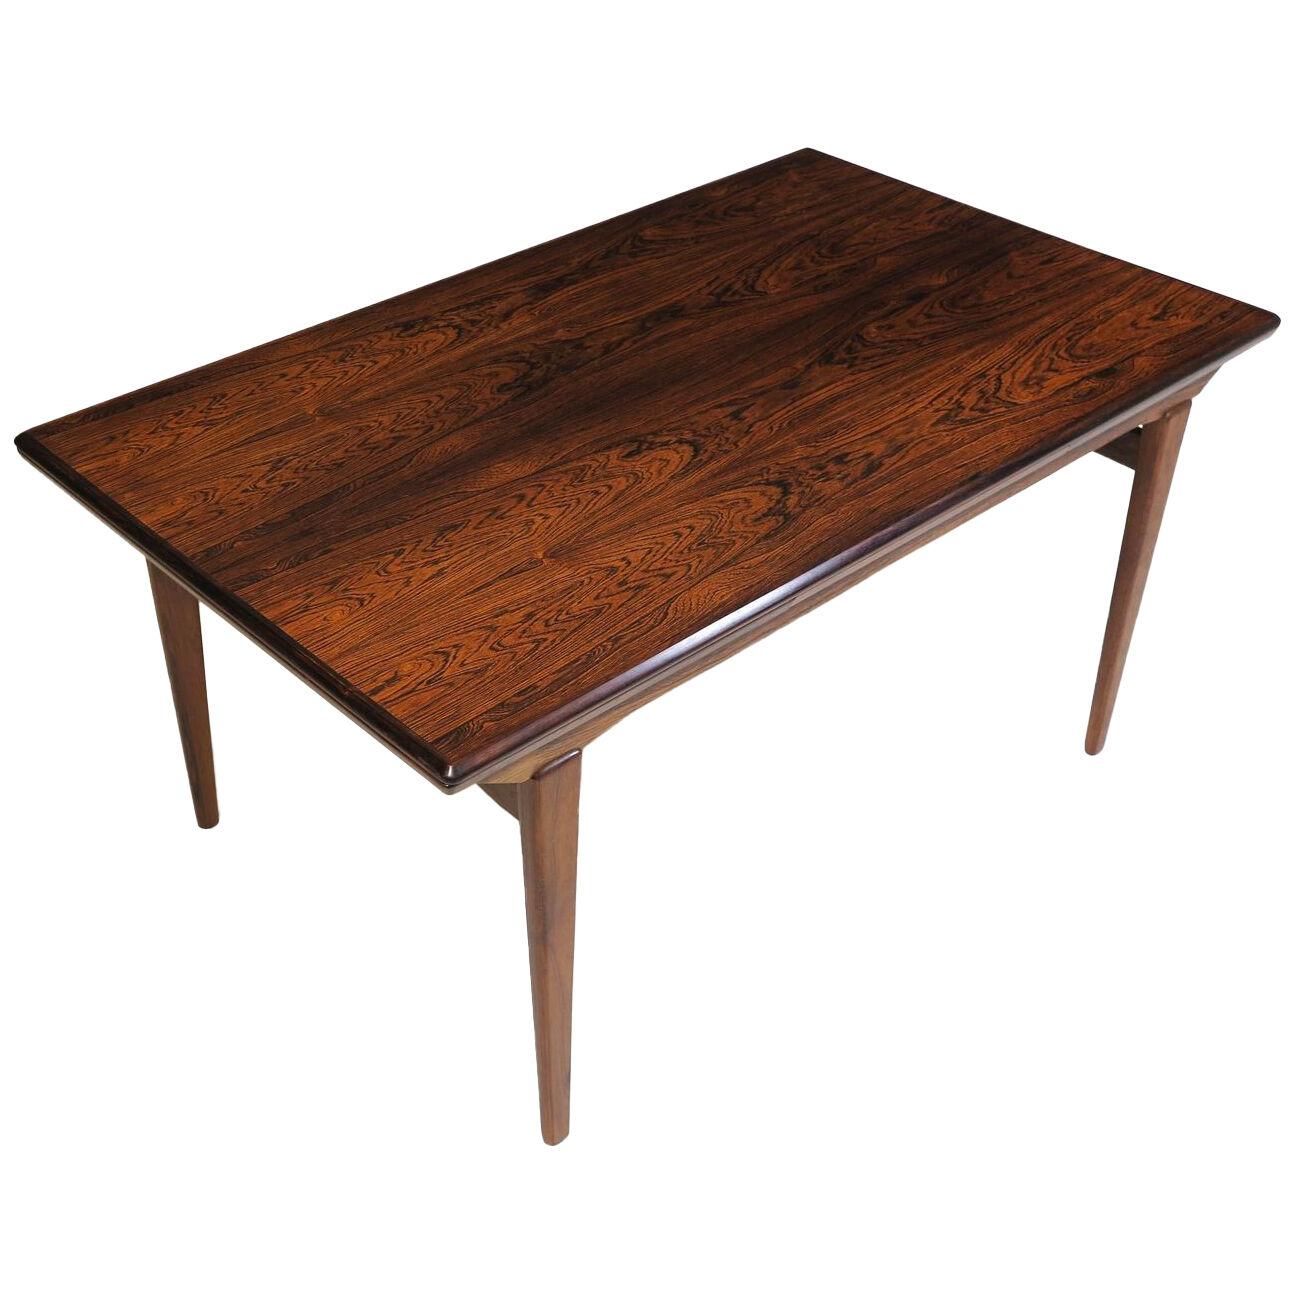 Danish Brazilian Rosewood Dining Table with Draw Leaves